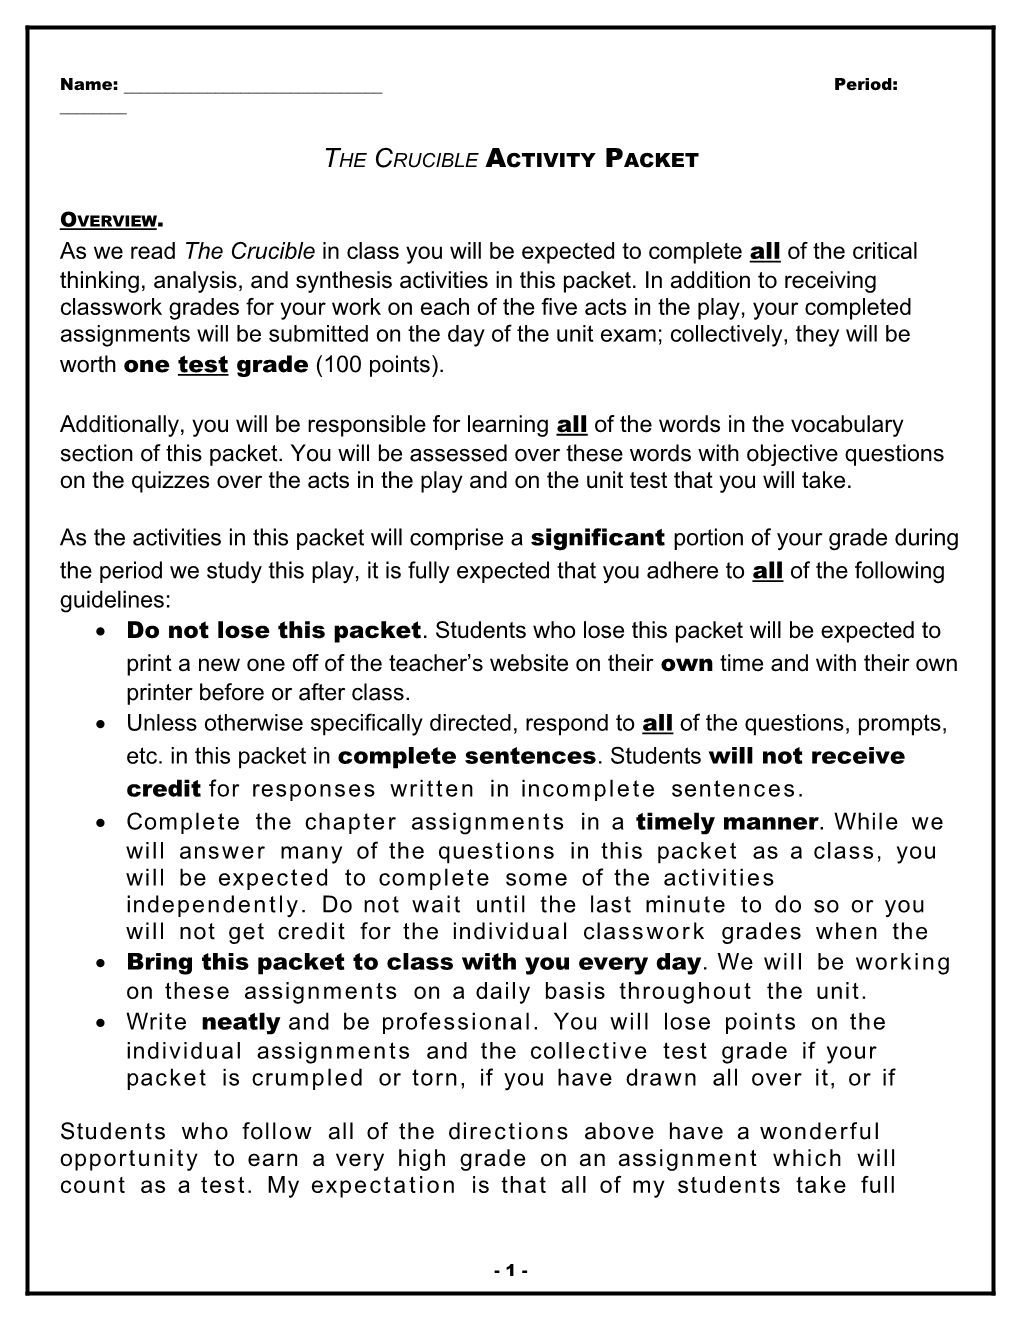 The Crucible Activity Packet